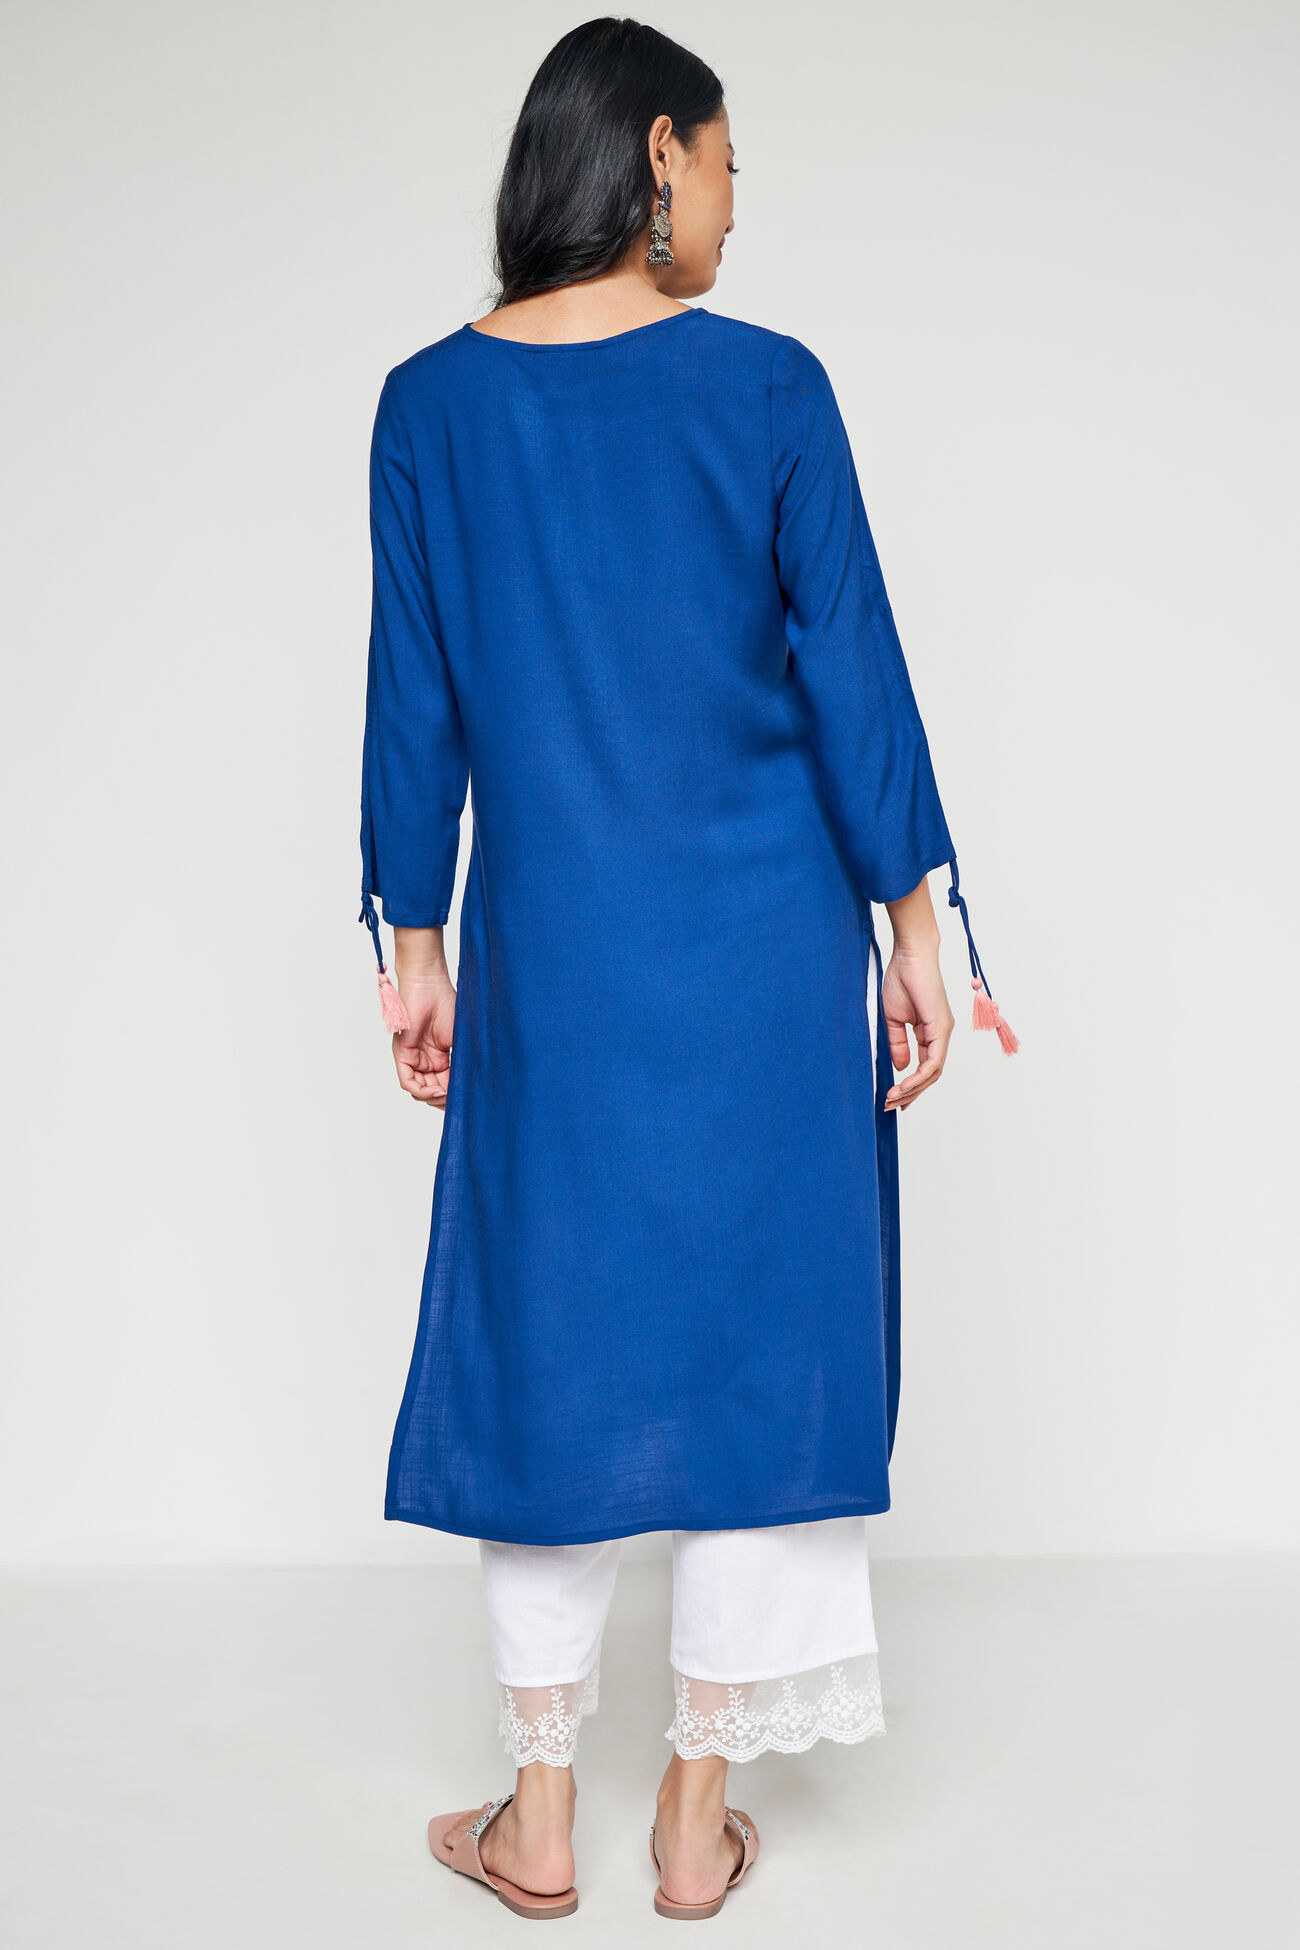 Navy Solid Embroidered Straight Kurta, Navy Blue, image 3